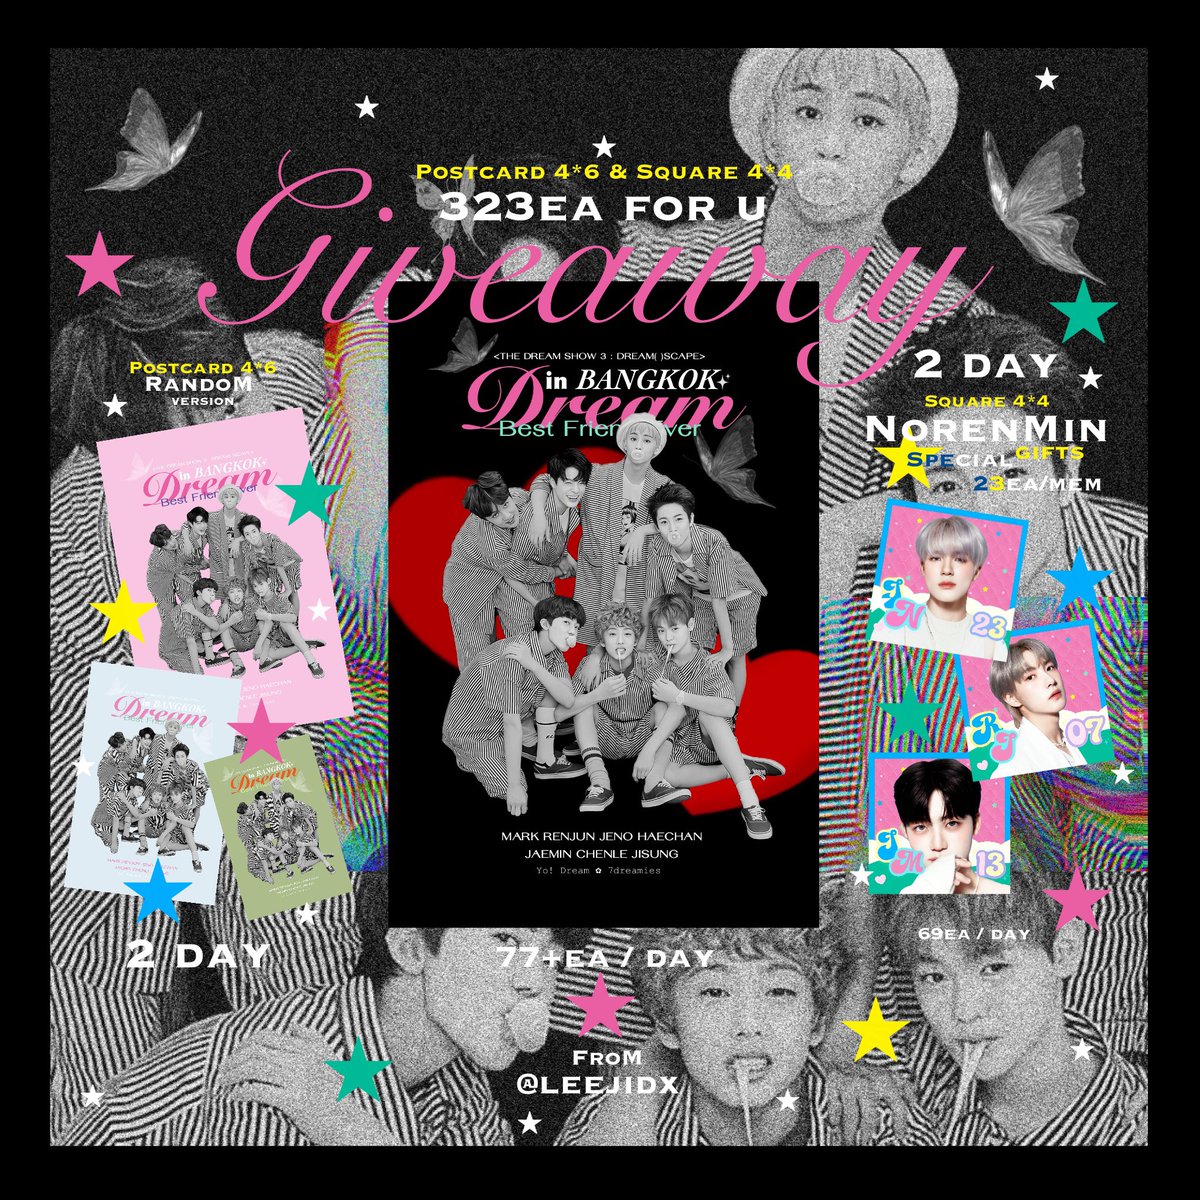 * pls kindly rt ✿ 𓈒 Giveaway 𖧧 7Dream tds3 in bkk ֺ⭑ 🫳🏻🫳🏻🫳🏻🫳🏻🫳🏻🫳🏻🫳🏻 🐯🦊🐶🐻🐰🐬🐥 baby dreamies chewing gum ͟͟͞♡ P🍎stcard & Square 323 EA ! 🗓️ date : 22 - 23 june 2024 🐠🪼 🕛 time : tba 📍 location : Rajamangala National Stadium #NCTDREAM_THEDREAMSHOW3_in_BKK